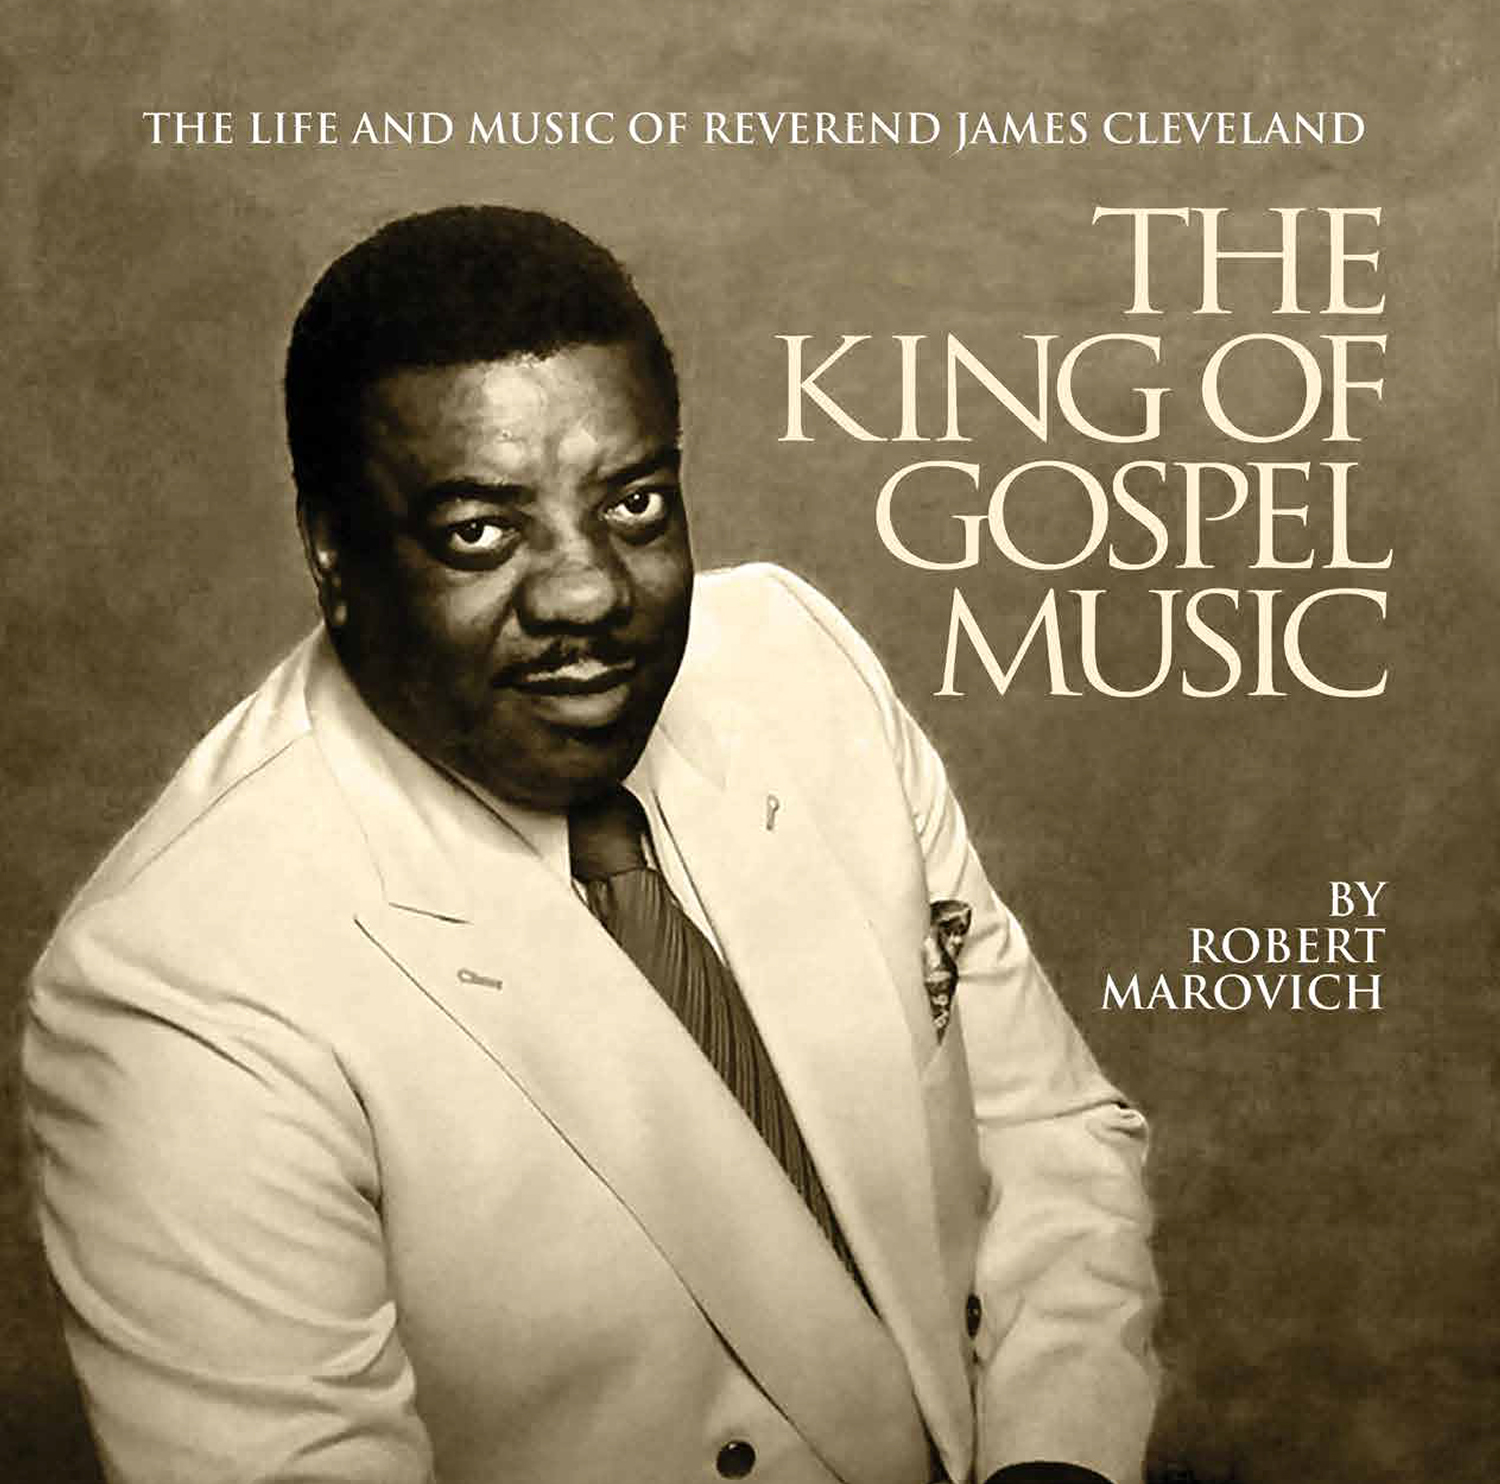 The King of Gospel Music: The Life and Music of Reverend James Cleveland